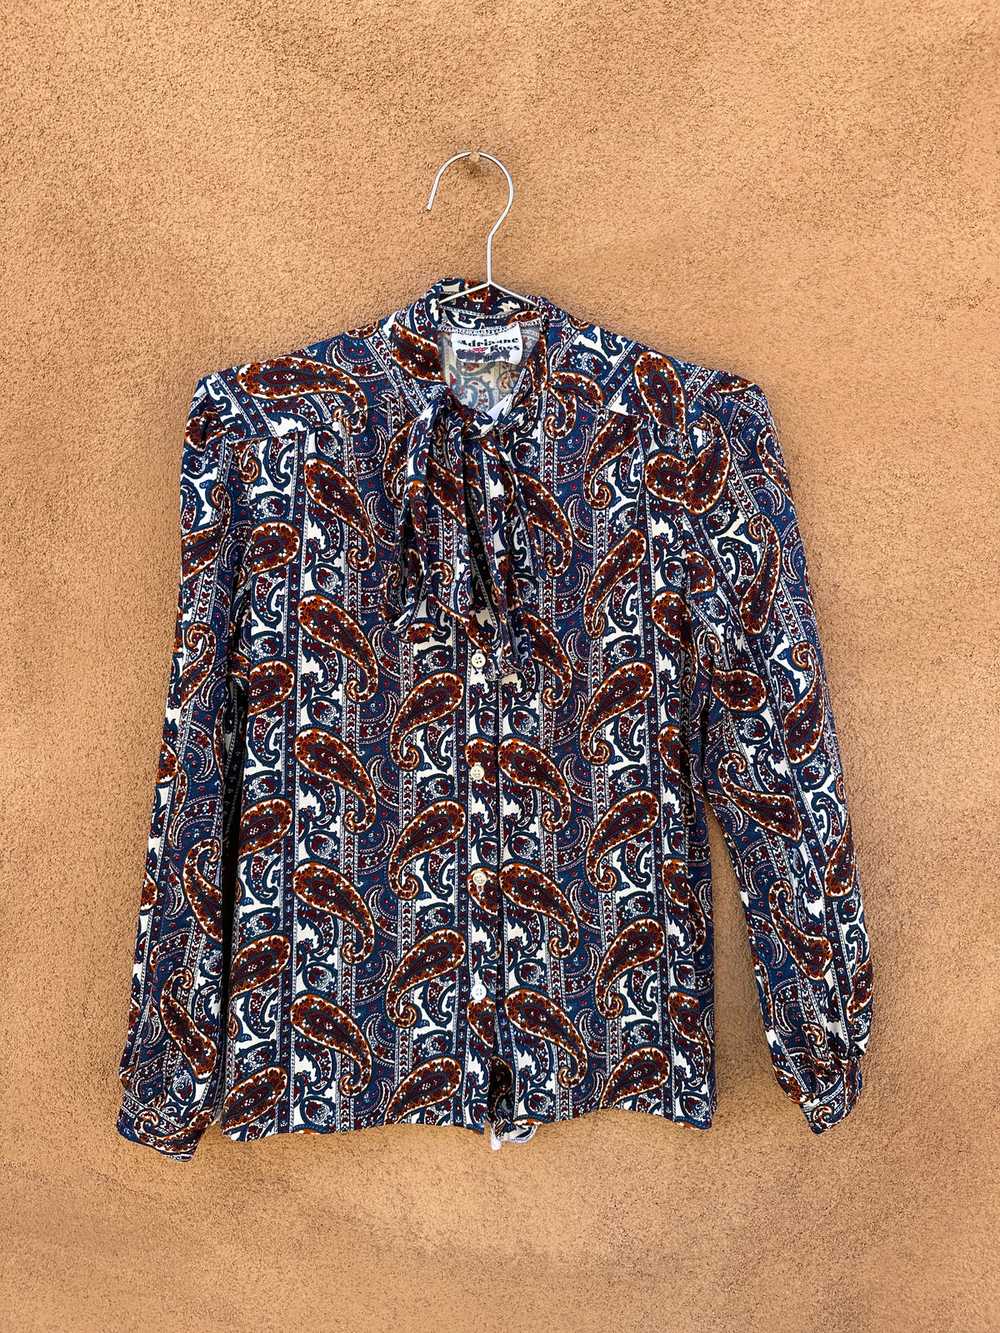 70's Adrianne Ross Paisley Blouse - image 1